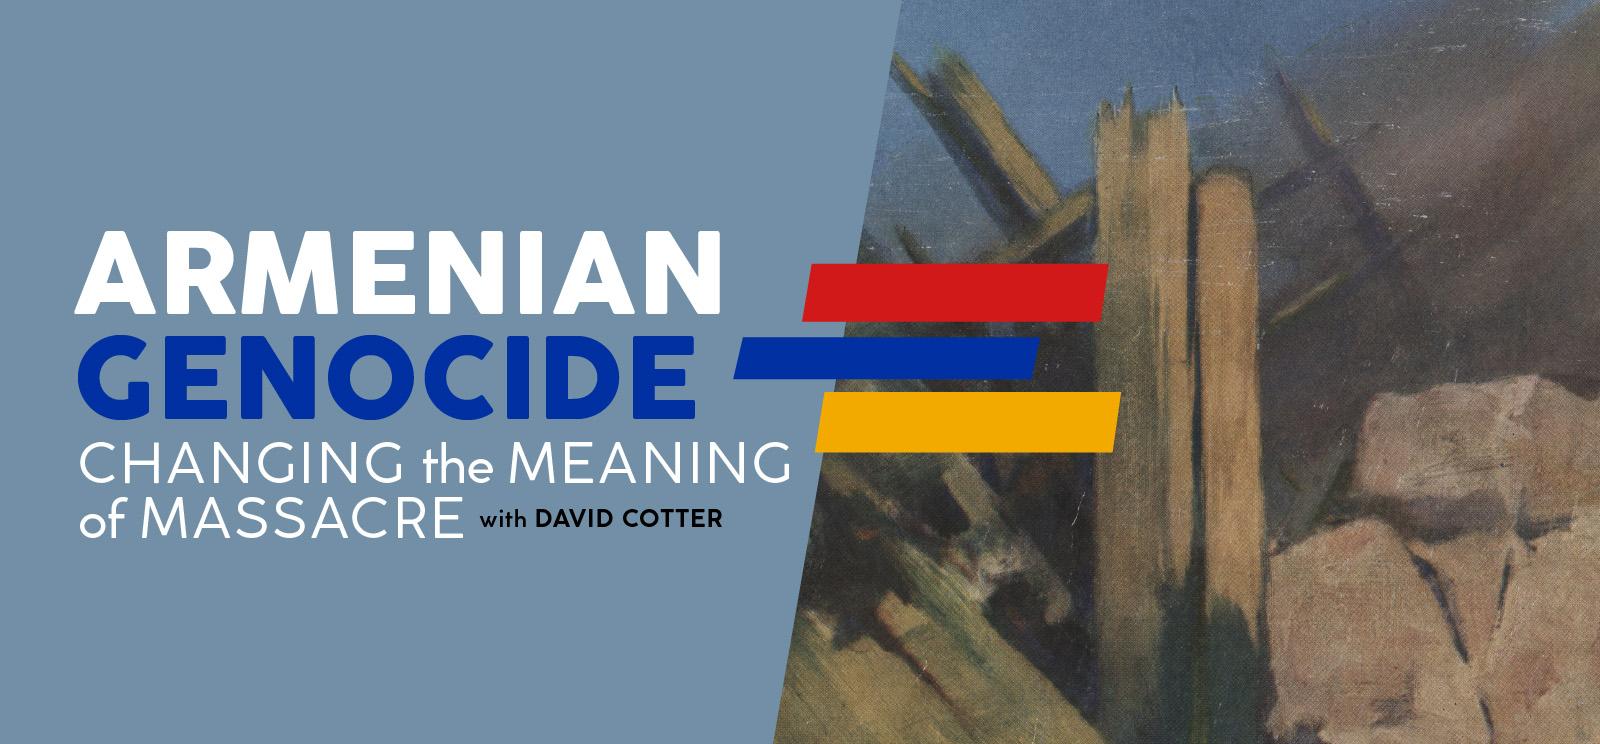 Image: Painting of destroyed structures. Three stripes on top in the red, blue and yellow, the Armenian flag colors. Text: Armenian Genocide / Changing the Meaning of Massacre